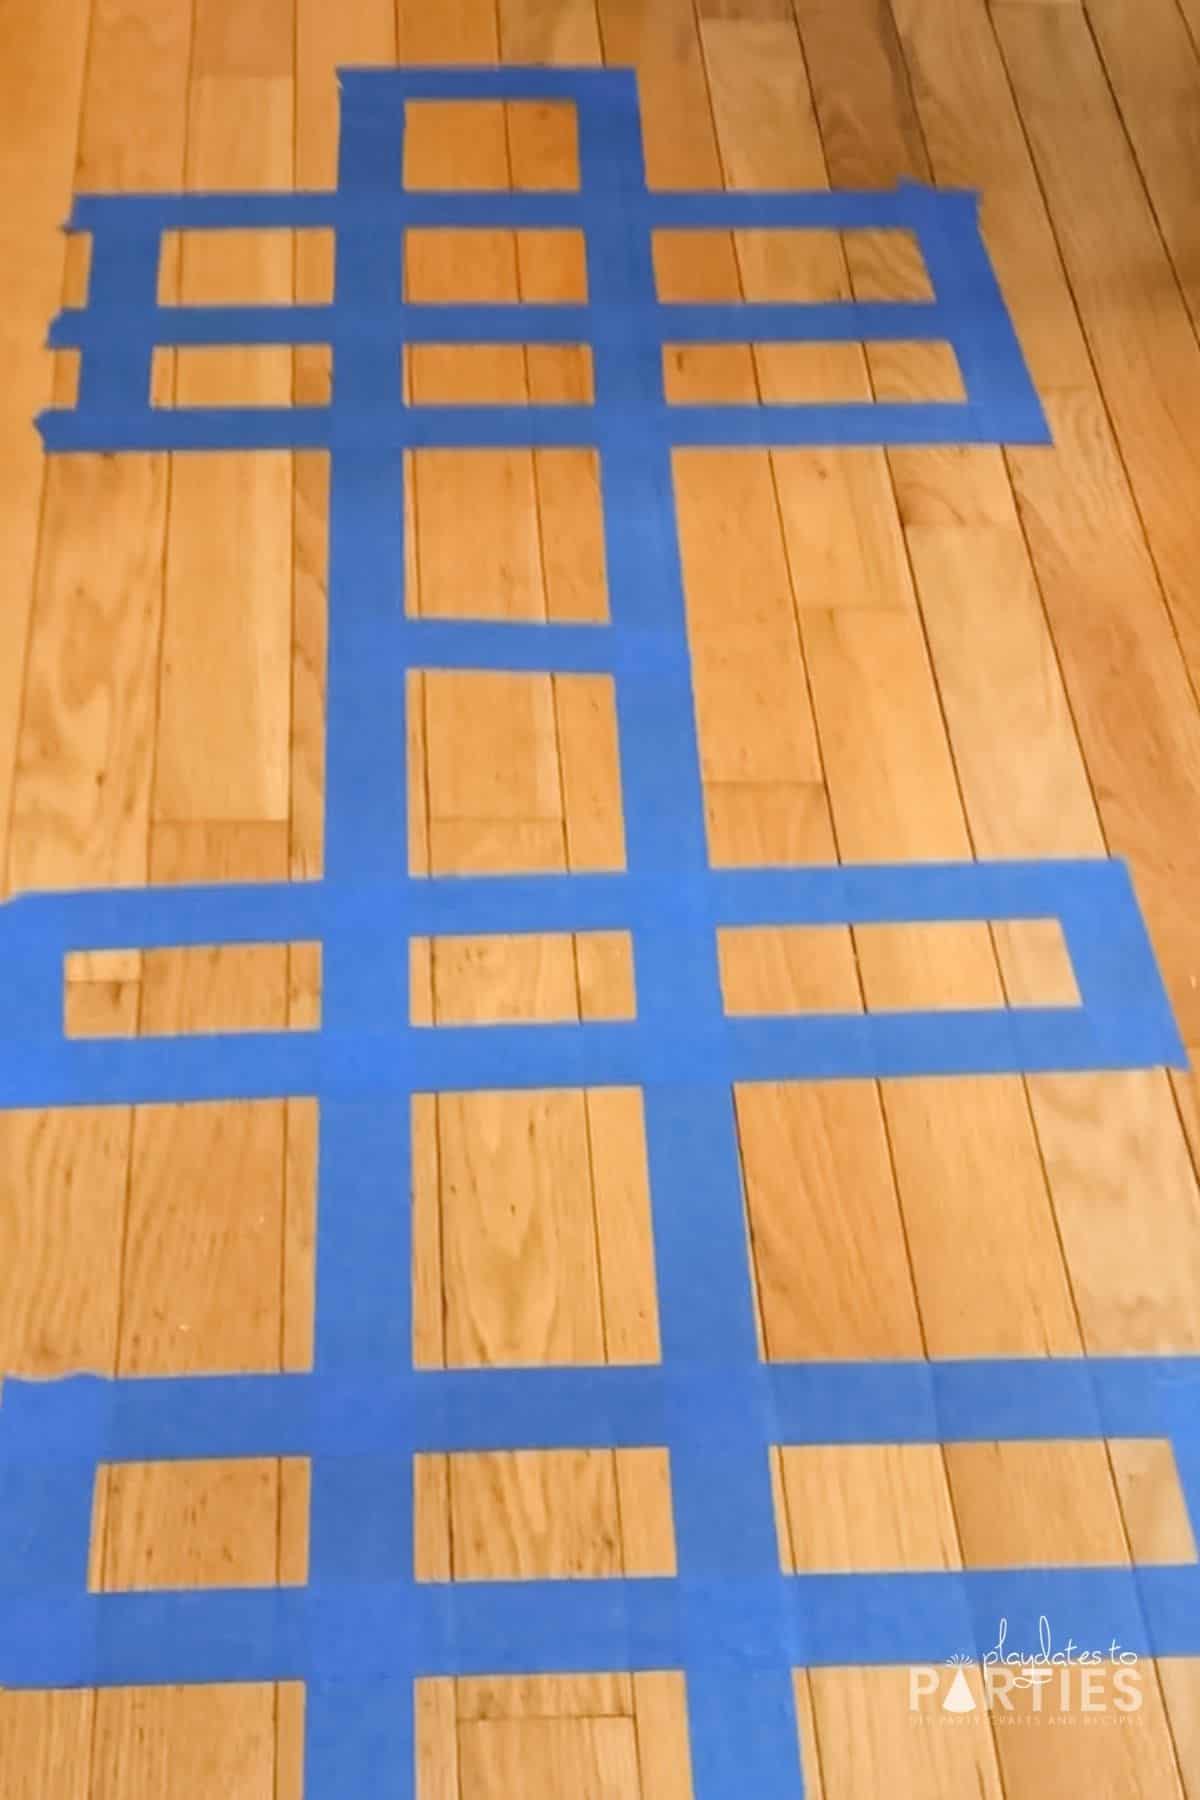 A finished course on a hardwood floor made with painter's tape